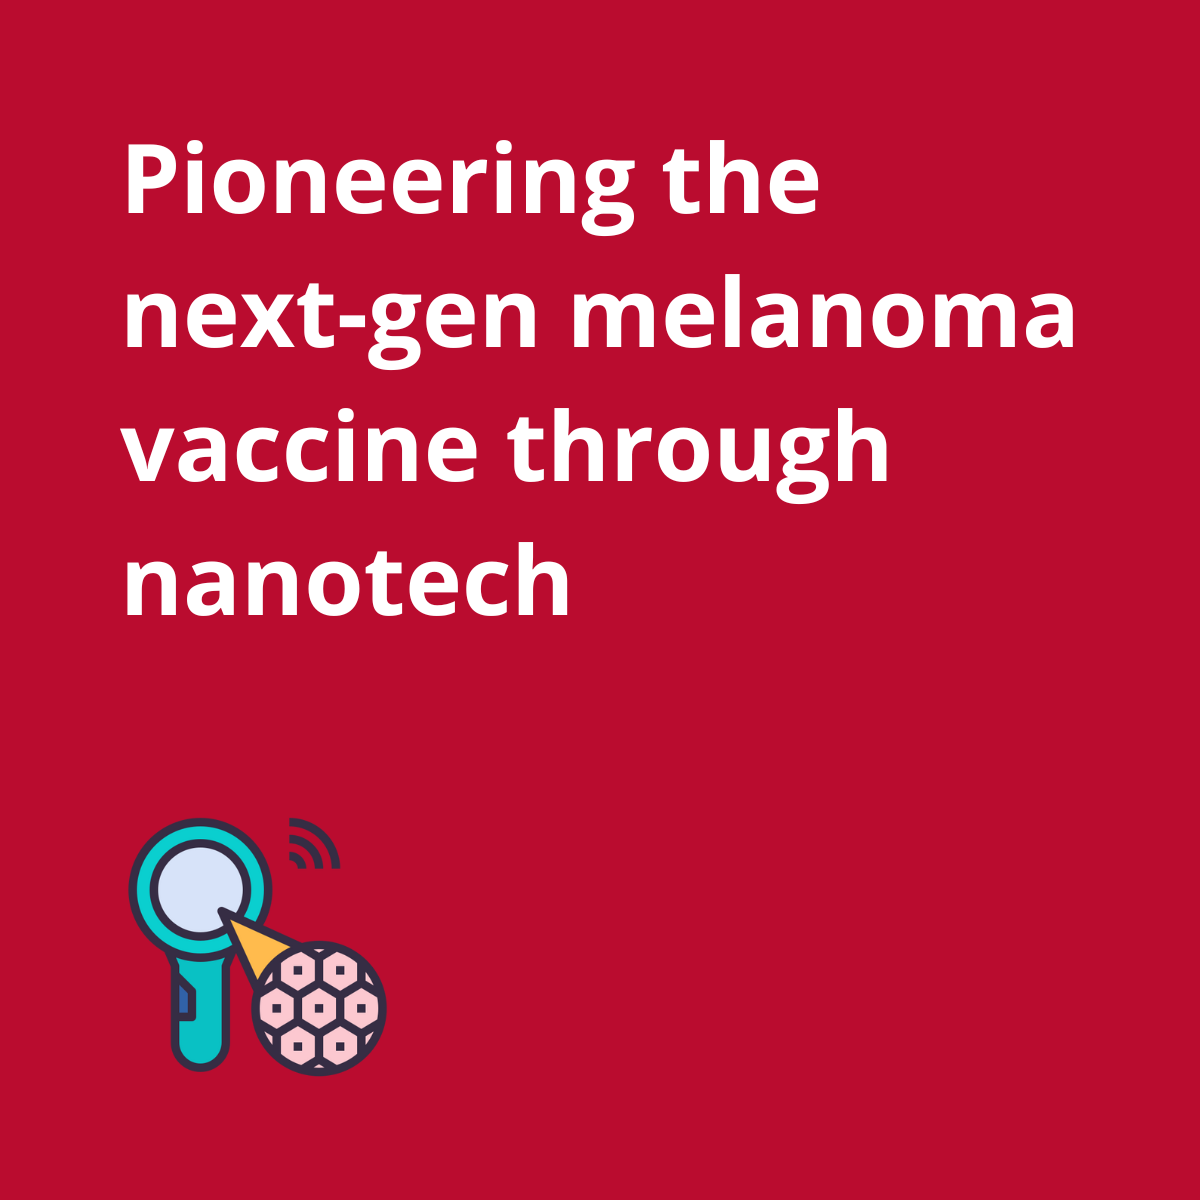 A personalized mRNA anti-cancer vaccine to fight melanoma is being tested in a phase 3 clinical trial.